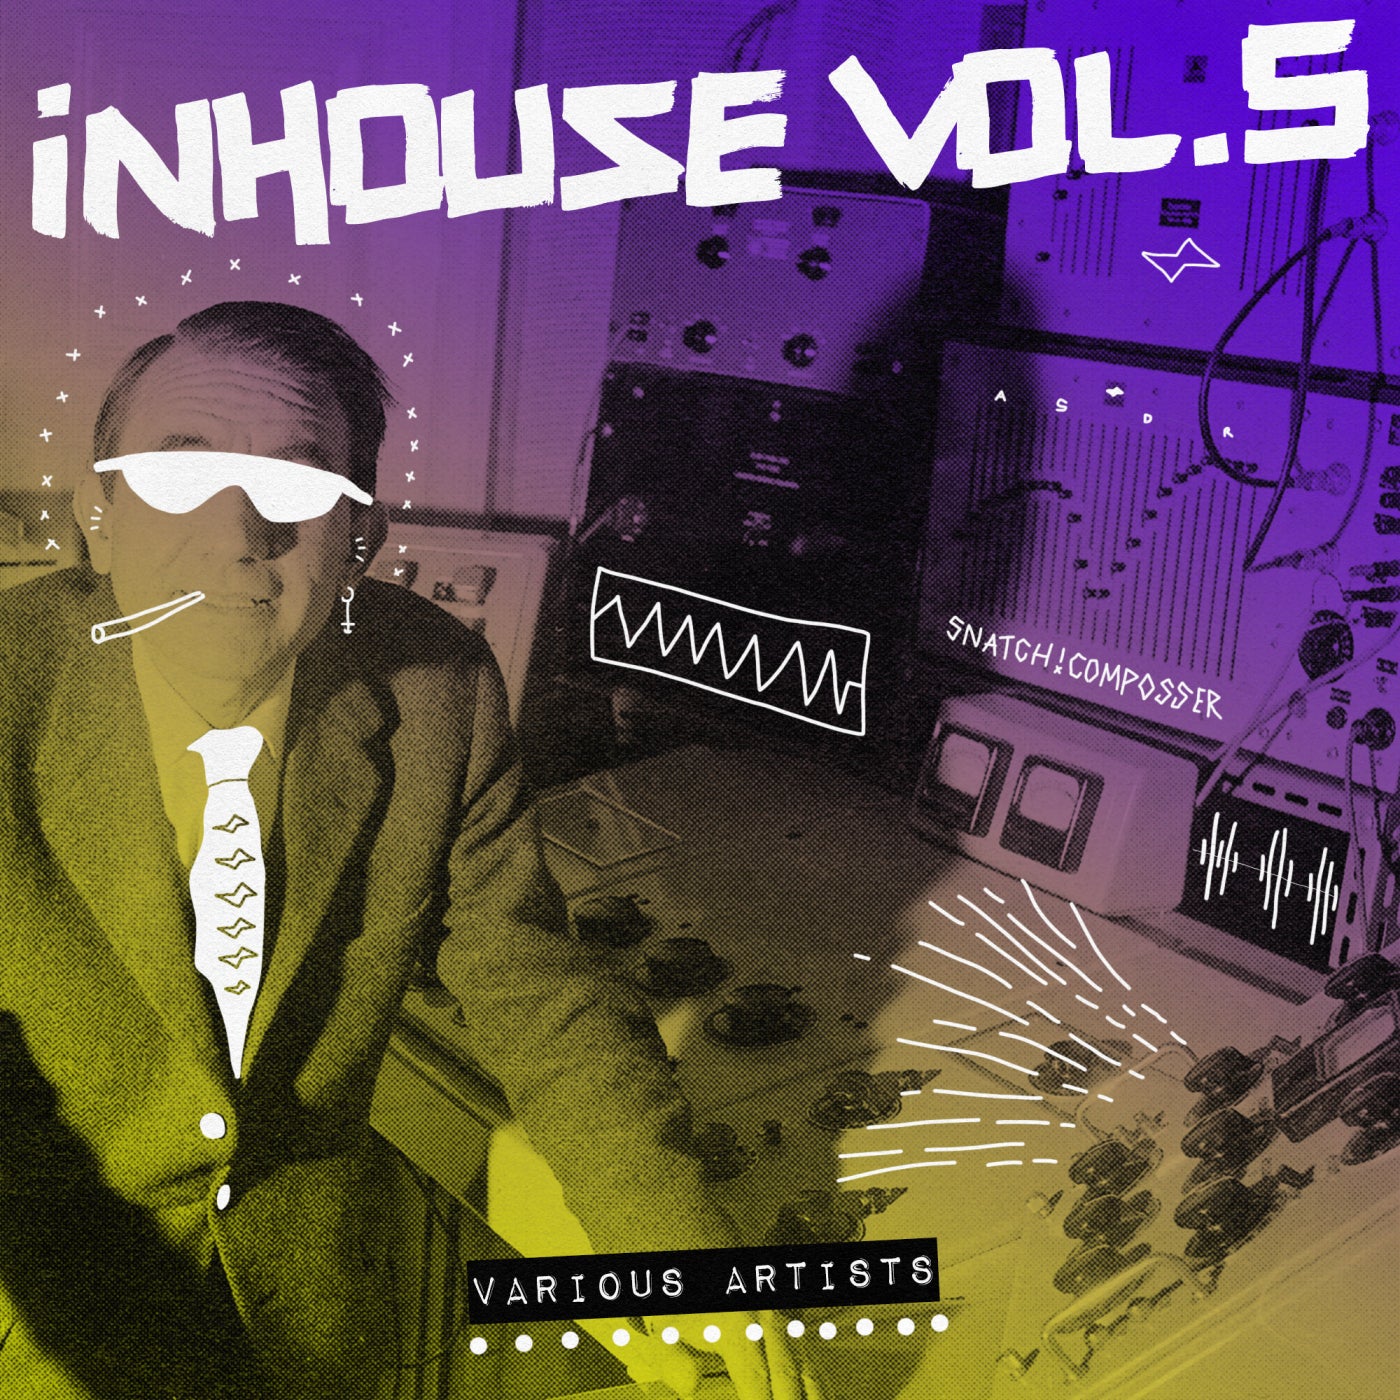 In House, Vol. 5